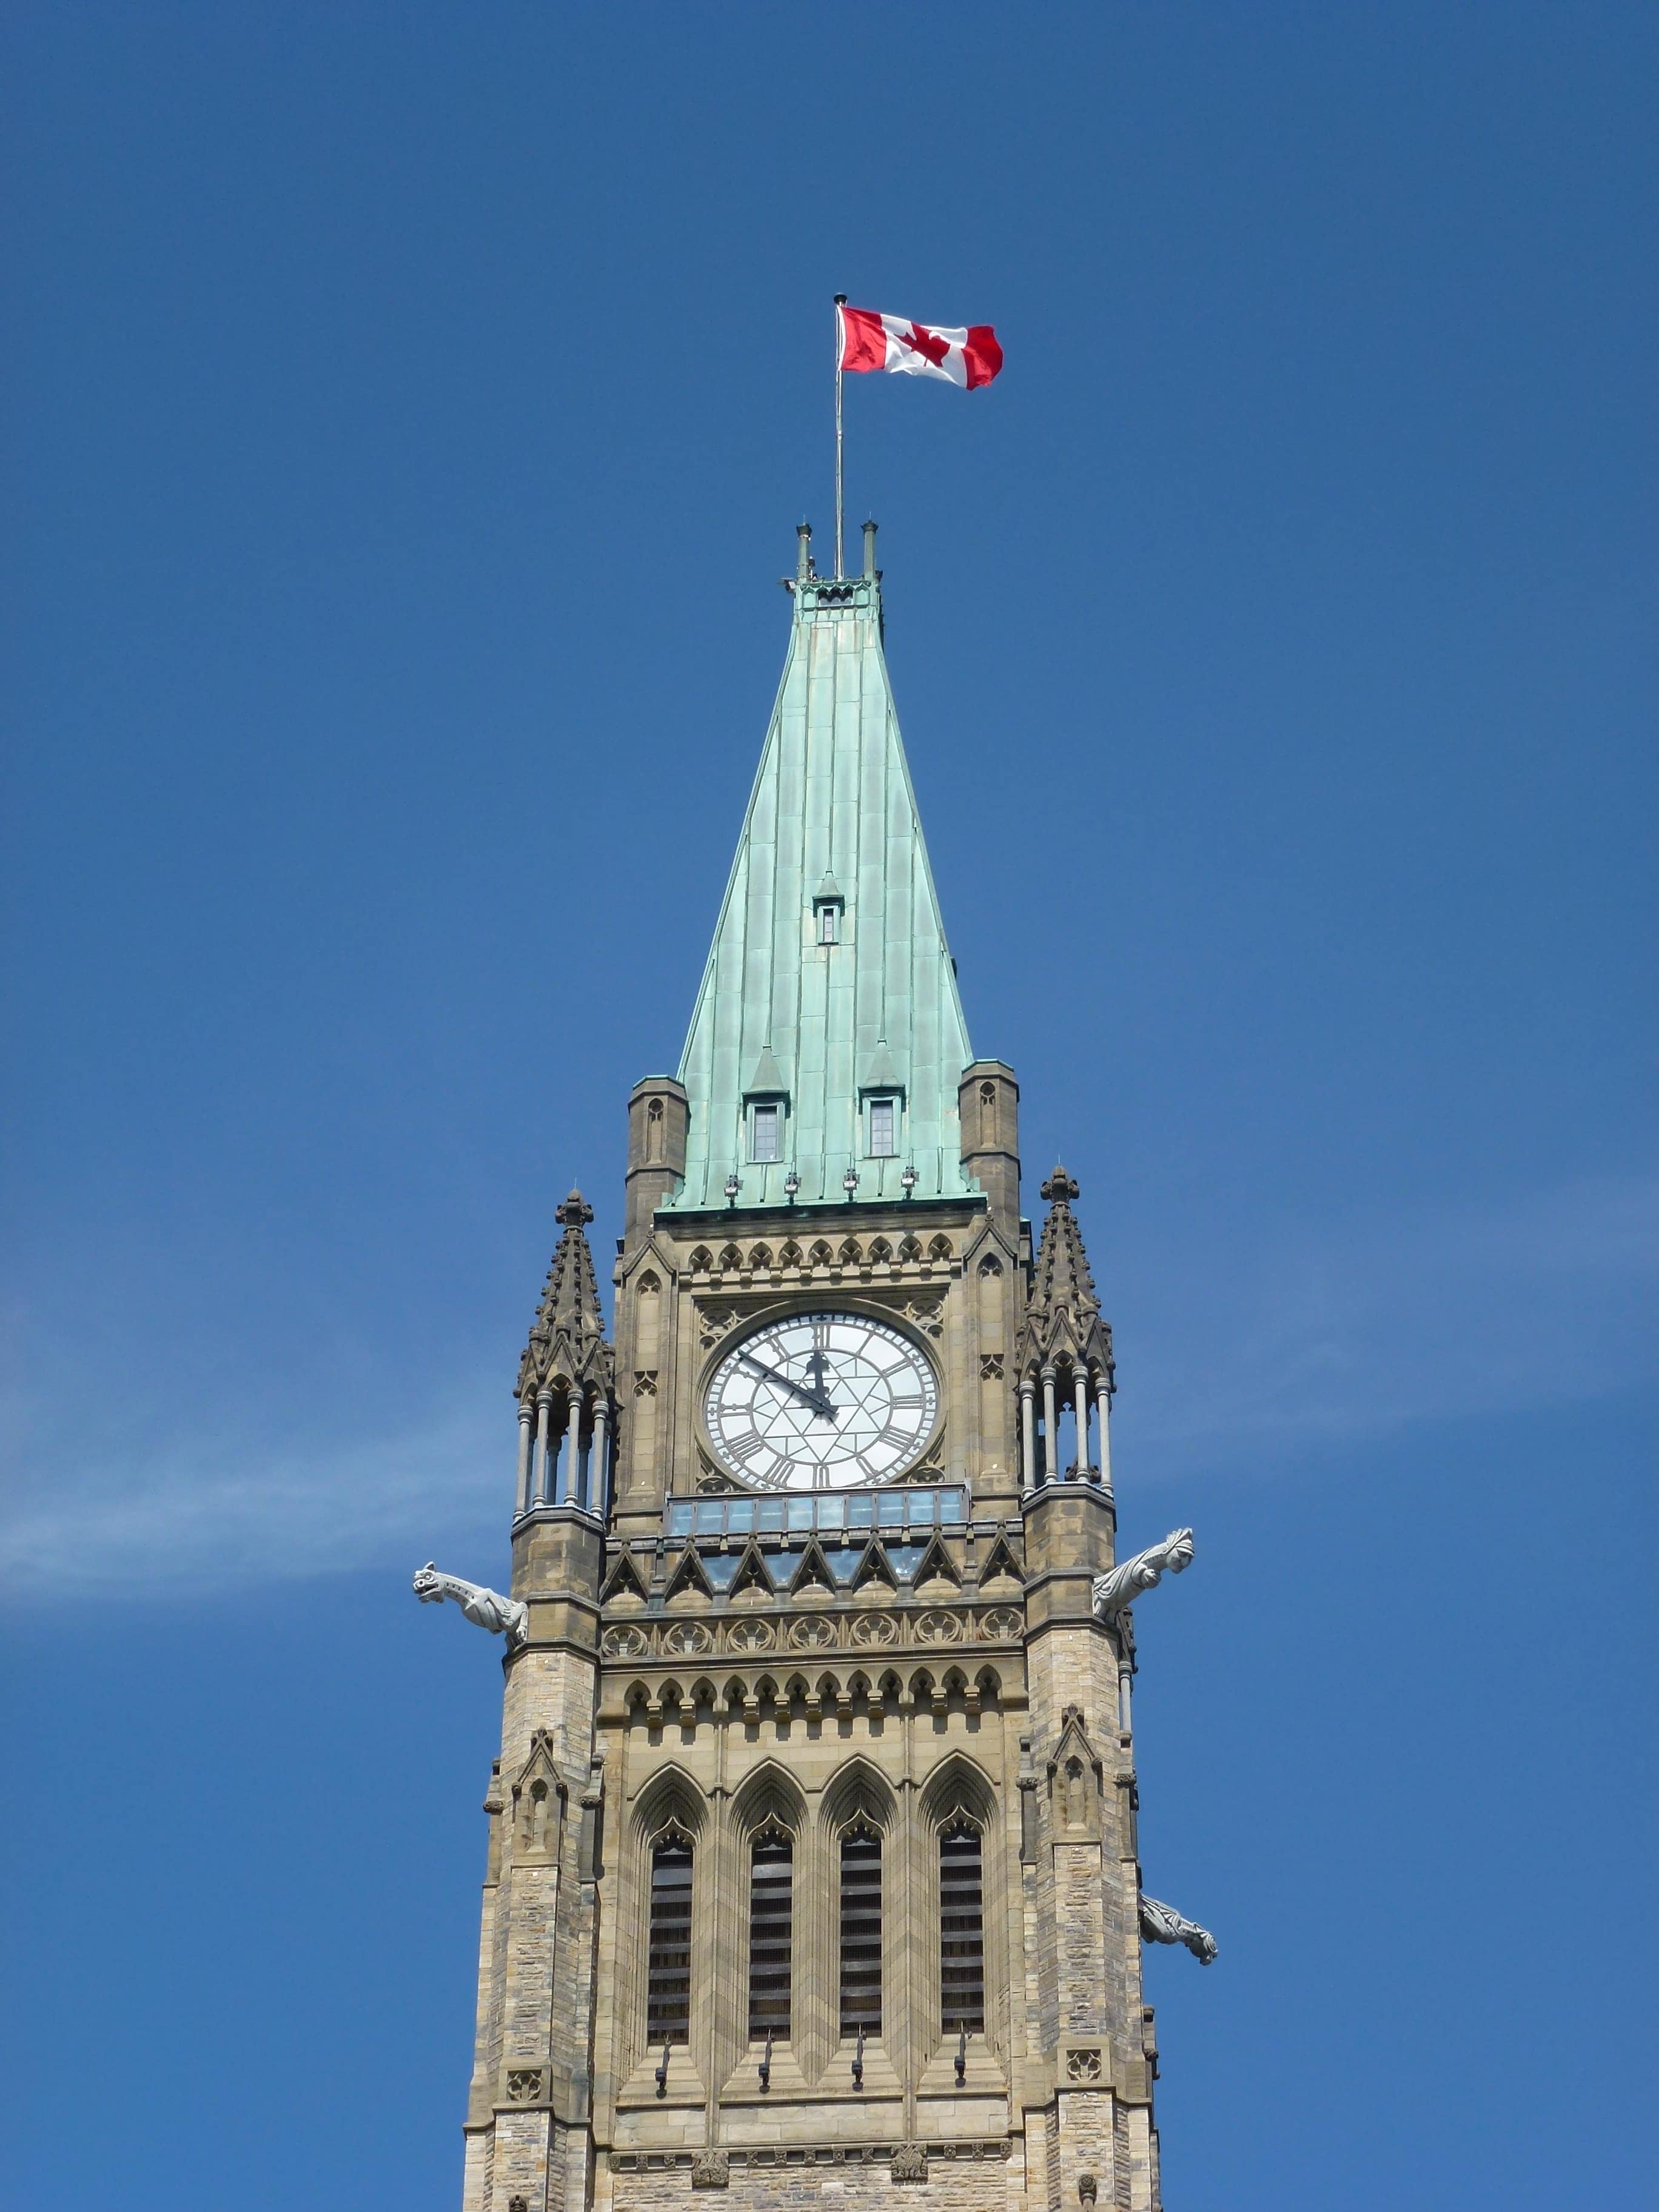 Peace Tower of Centre Block at Parliament Hill in Ottawa, Ontario, Canada